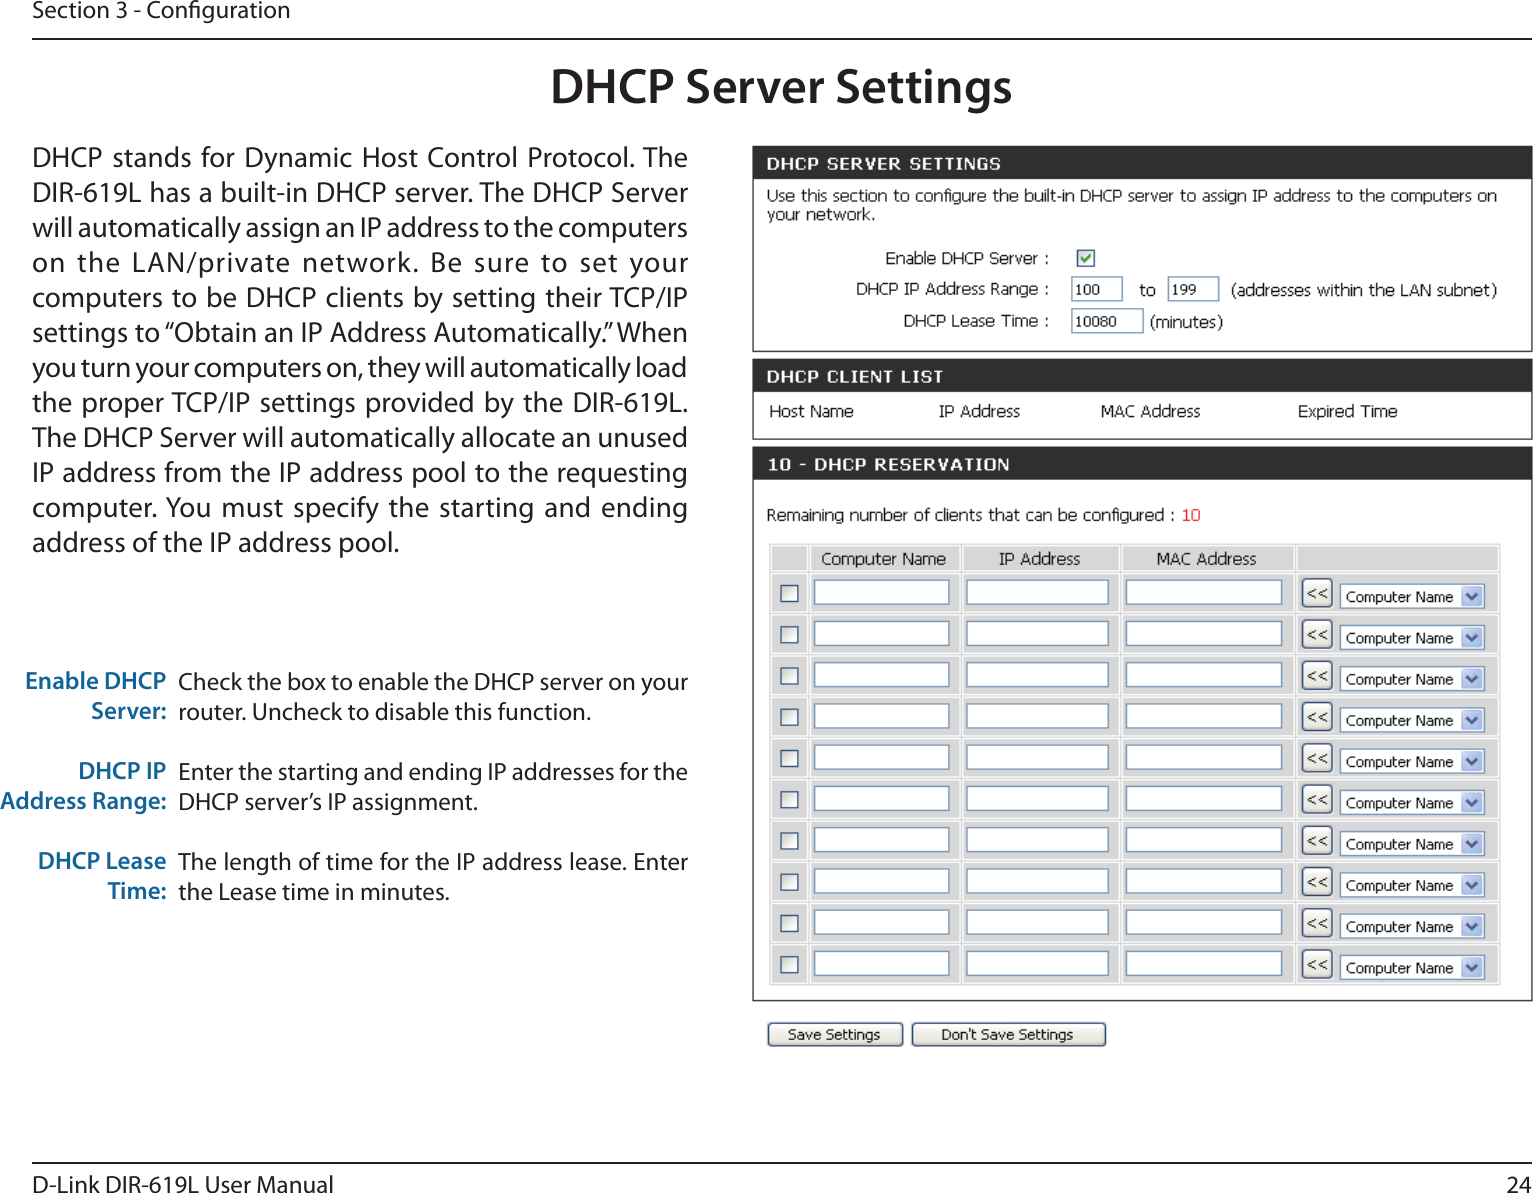 24D-Link DIR-619L User ManualSection 3 - CongurationCheck the box to enable the DHCP server on your router. Uncheck to disable this function.Enter the starting and ending IP addresses for the DHCP server’s IP assignment.The length of time for the IP address lease. Enter the Lease time in minutes.Enable DHCP Server:DHCP IPAddress Range:DHCP Lease Time:DHCP Server SettingsDHCP stands for Dynamic Host  Control Protocol. The DIR-619L has a built-in DHCP server. The DHCP Server will automatically assign an IP address to the computers on the LAN/private network. Be sure to set your computers to be DHCP clients by setting their TCP/IP settings to “Obtain an IP Address Automatically.” When you turn your computers on, they will automatically load the proper TCP/IP settings provided by the DIR-619L. The DHCP Server will automatically allocate an unused IP address from the IP address pool to the requesting computer. You  must specify  the starting  and ending address of the IP address pool.